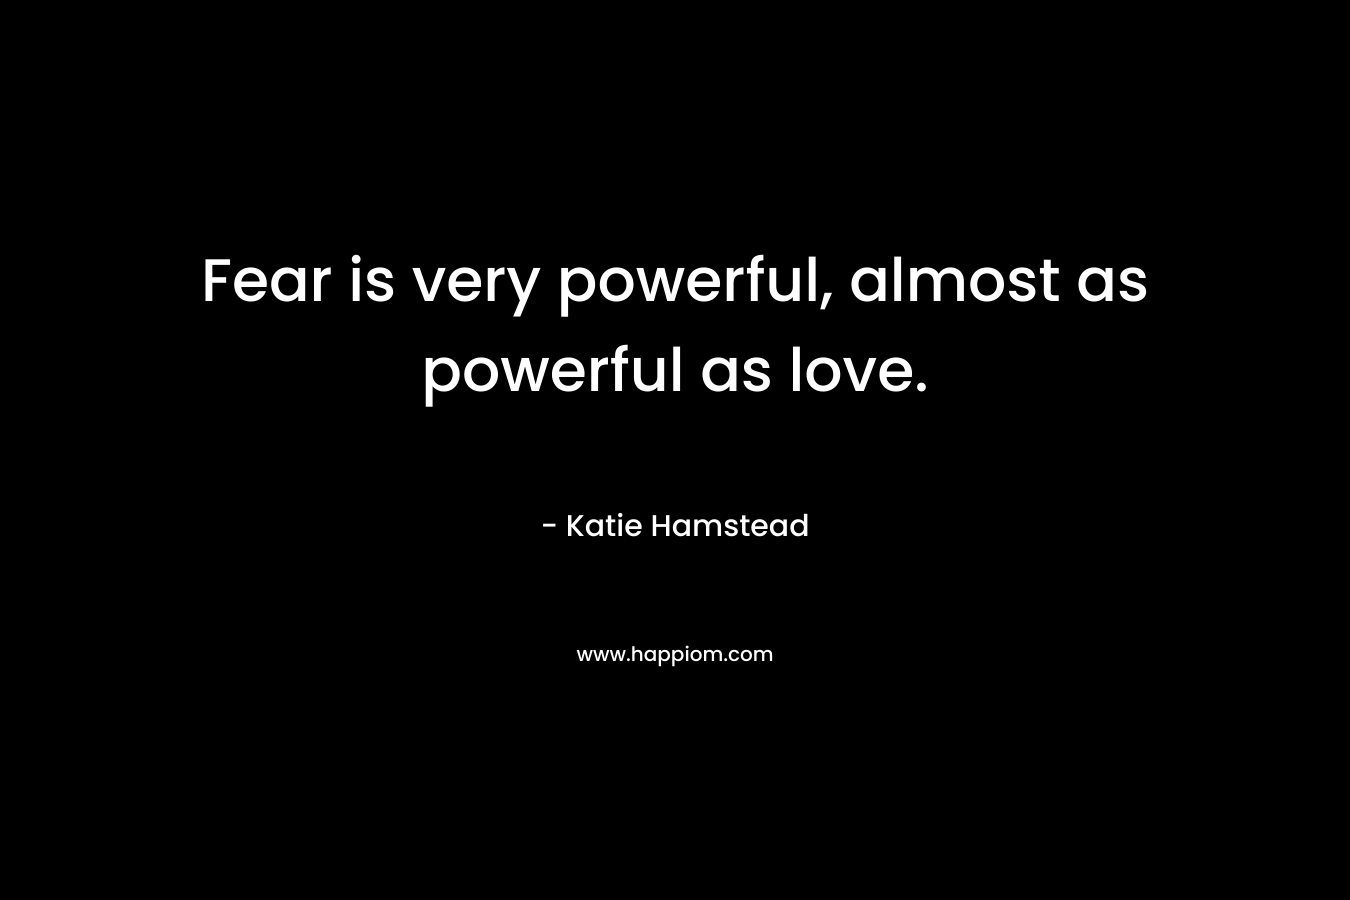 Fear is very powerful, almost as powerful as love.